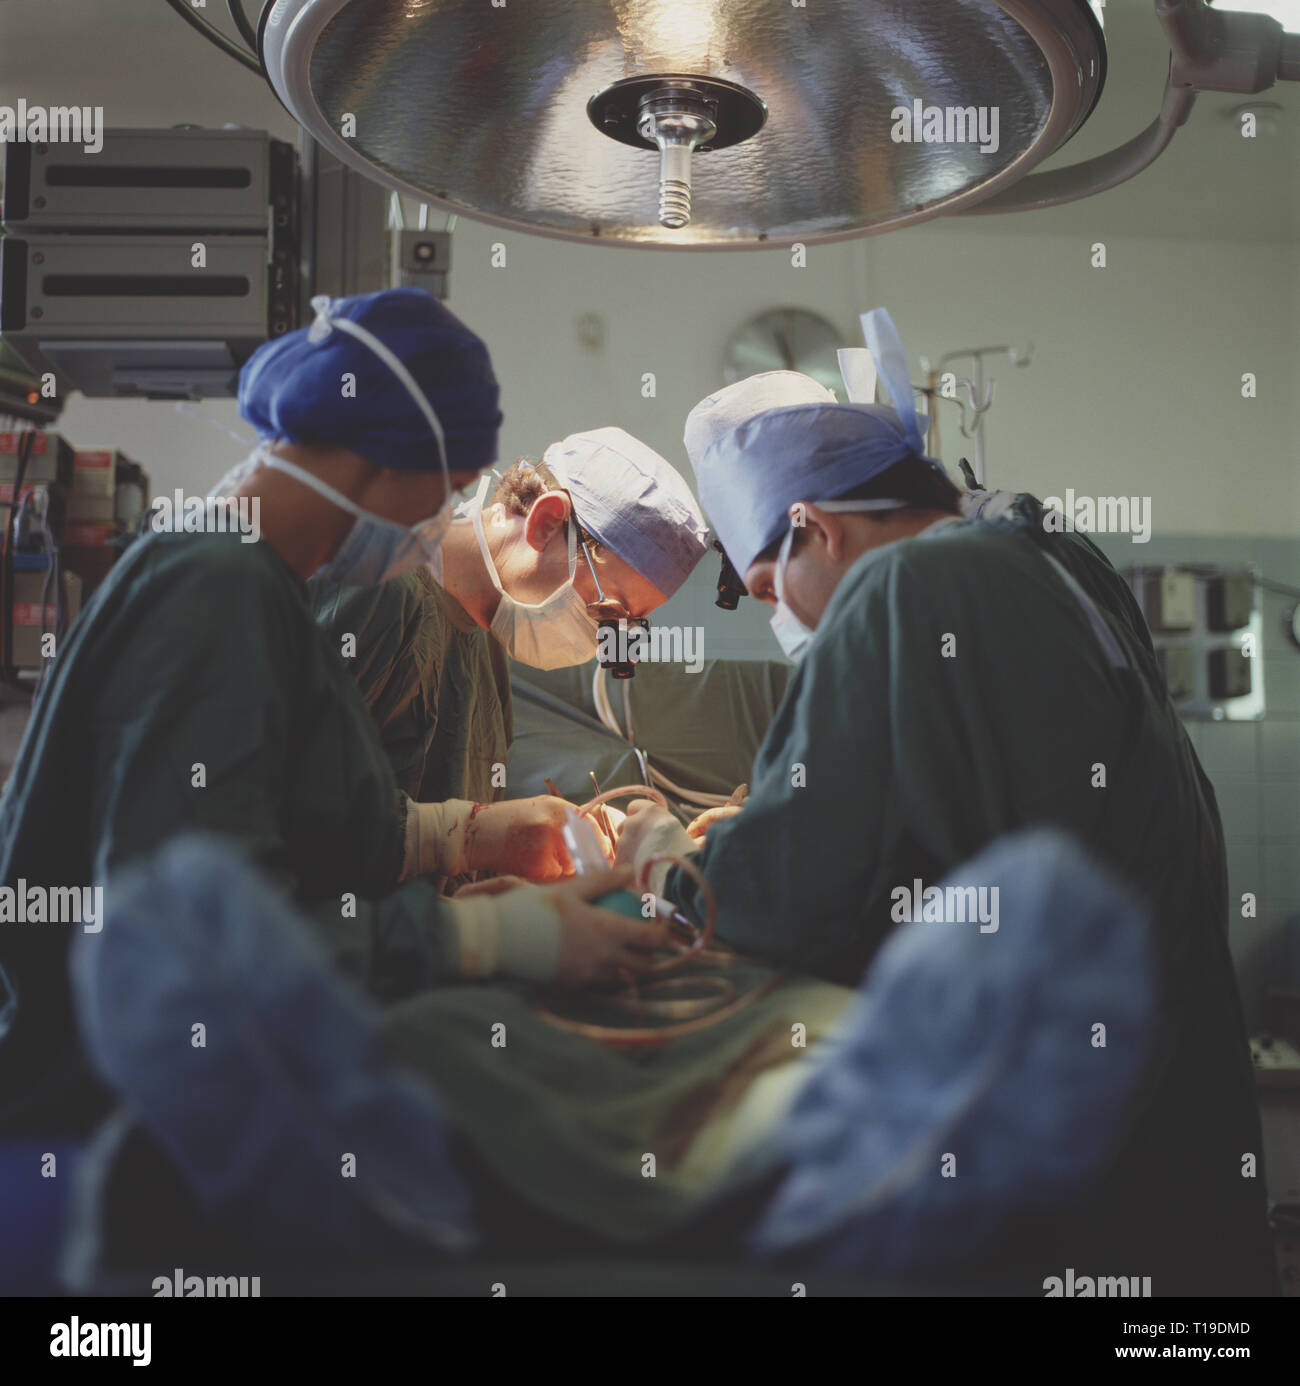 Medicine. Surgical team operating on patient. Stock Photo